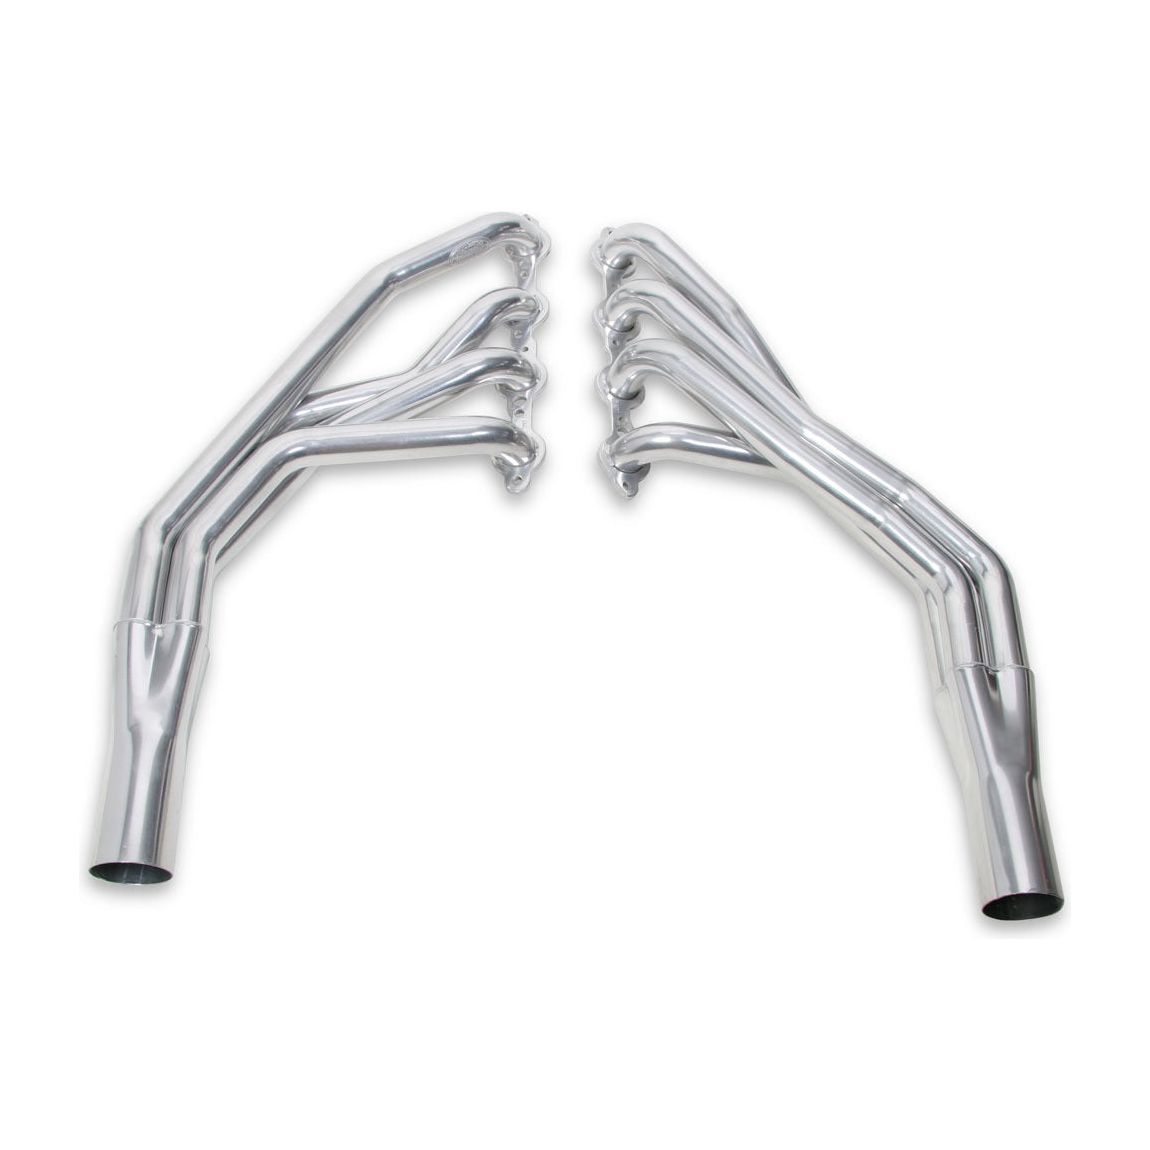 HOOKER 2292-1HKR - Coated Headers - 55-57 Chevy w/LS1/2/3